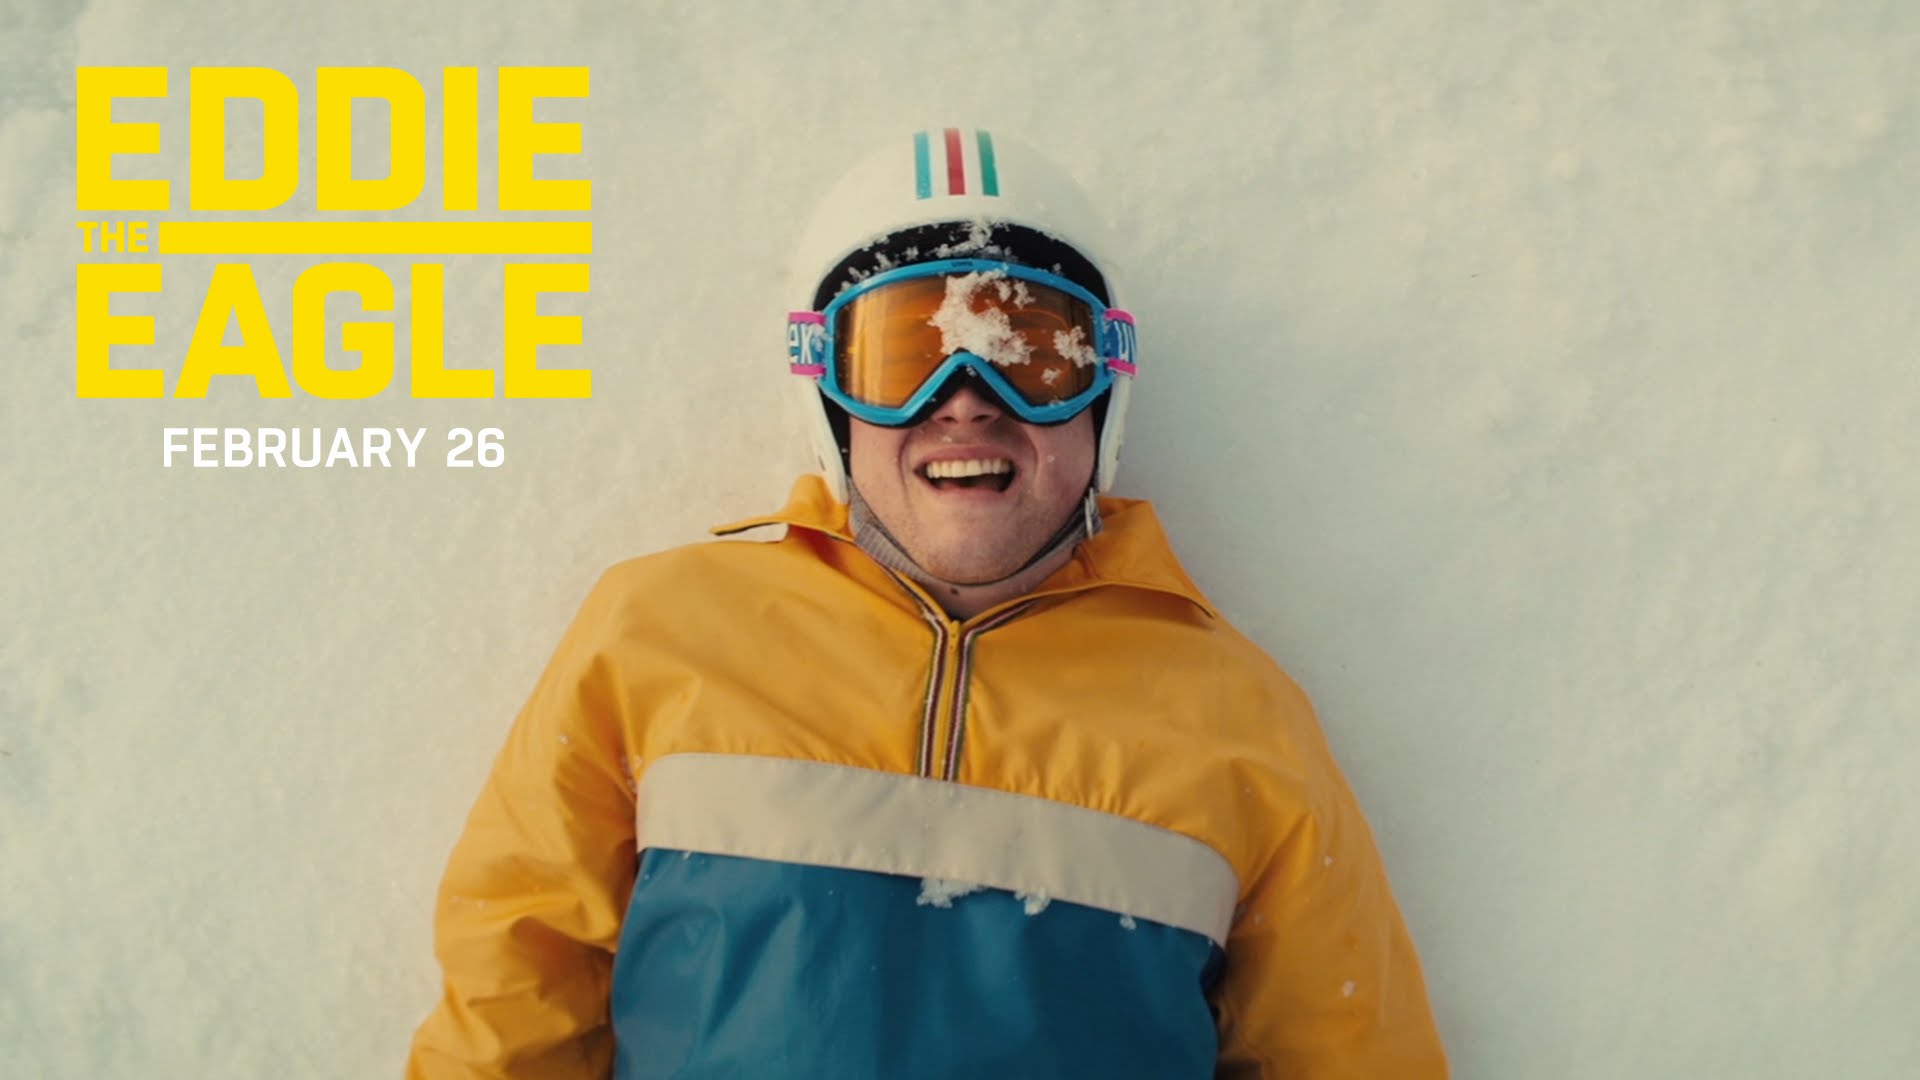 Eddie the Eagle | "Believe" TV Commercial